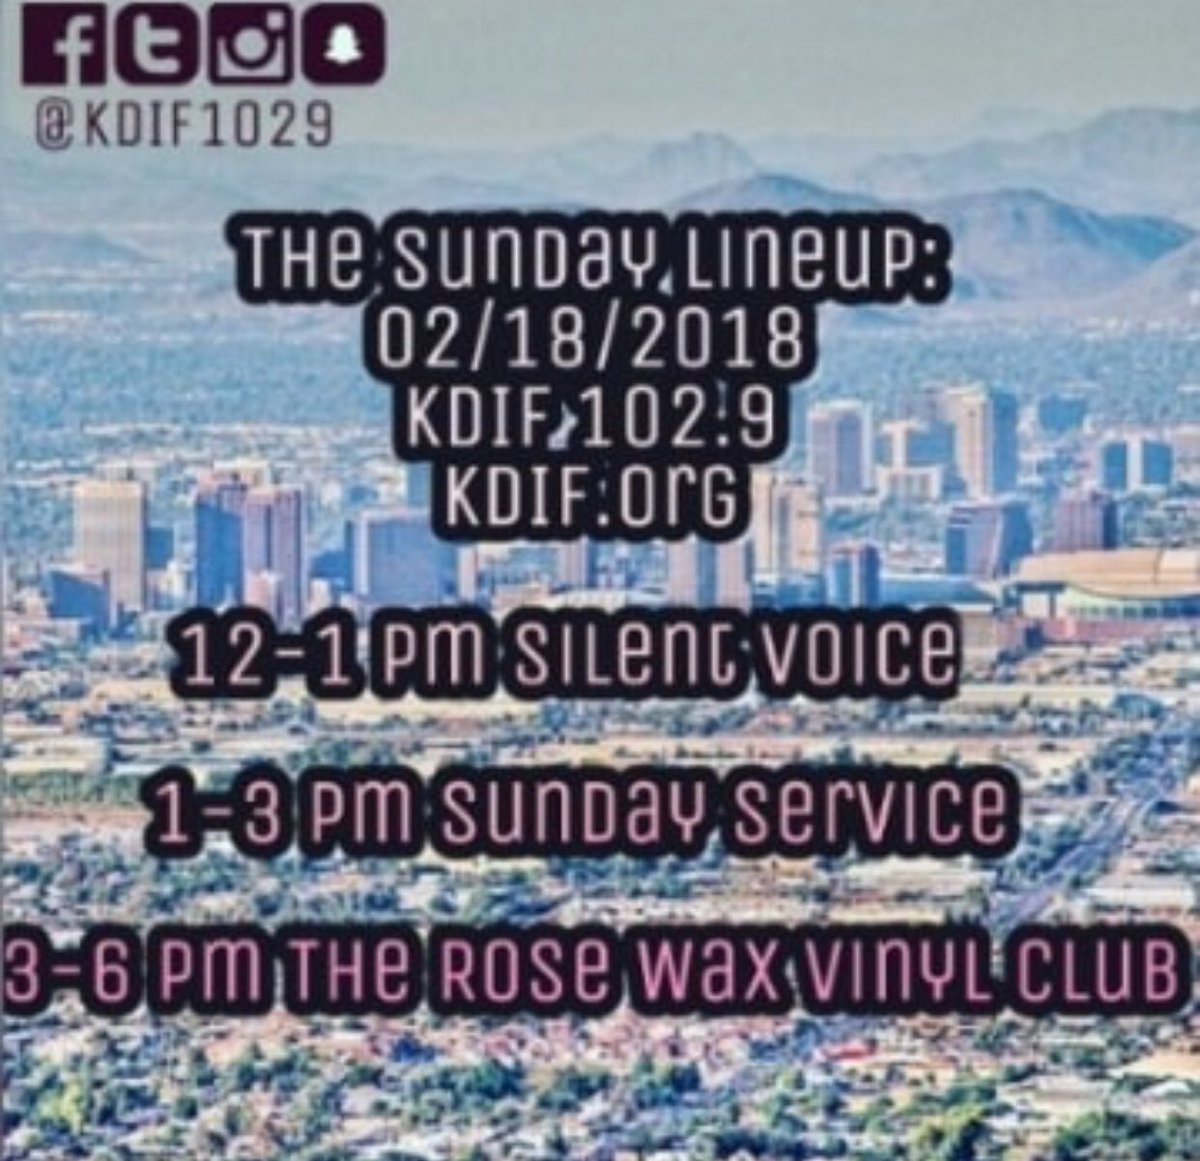 We’ve got a jammed pack lineup for y’all from 12-6 pm on this beautiful Sunday! Make sure to tune in to 102.9 or stream us live on KDIF.org #silentvoice #sundayservice#rosewaxvinylclub #radioprogramming #KDIF #stream #music #communityradio #southphoenix